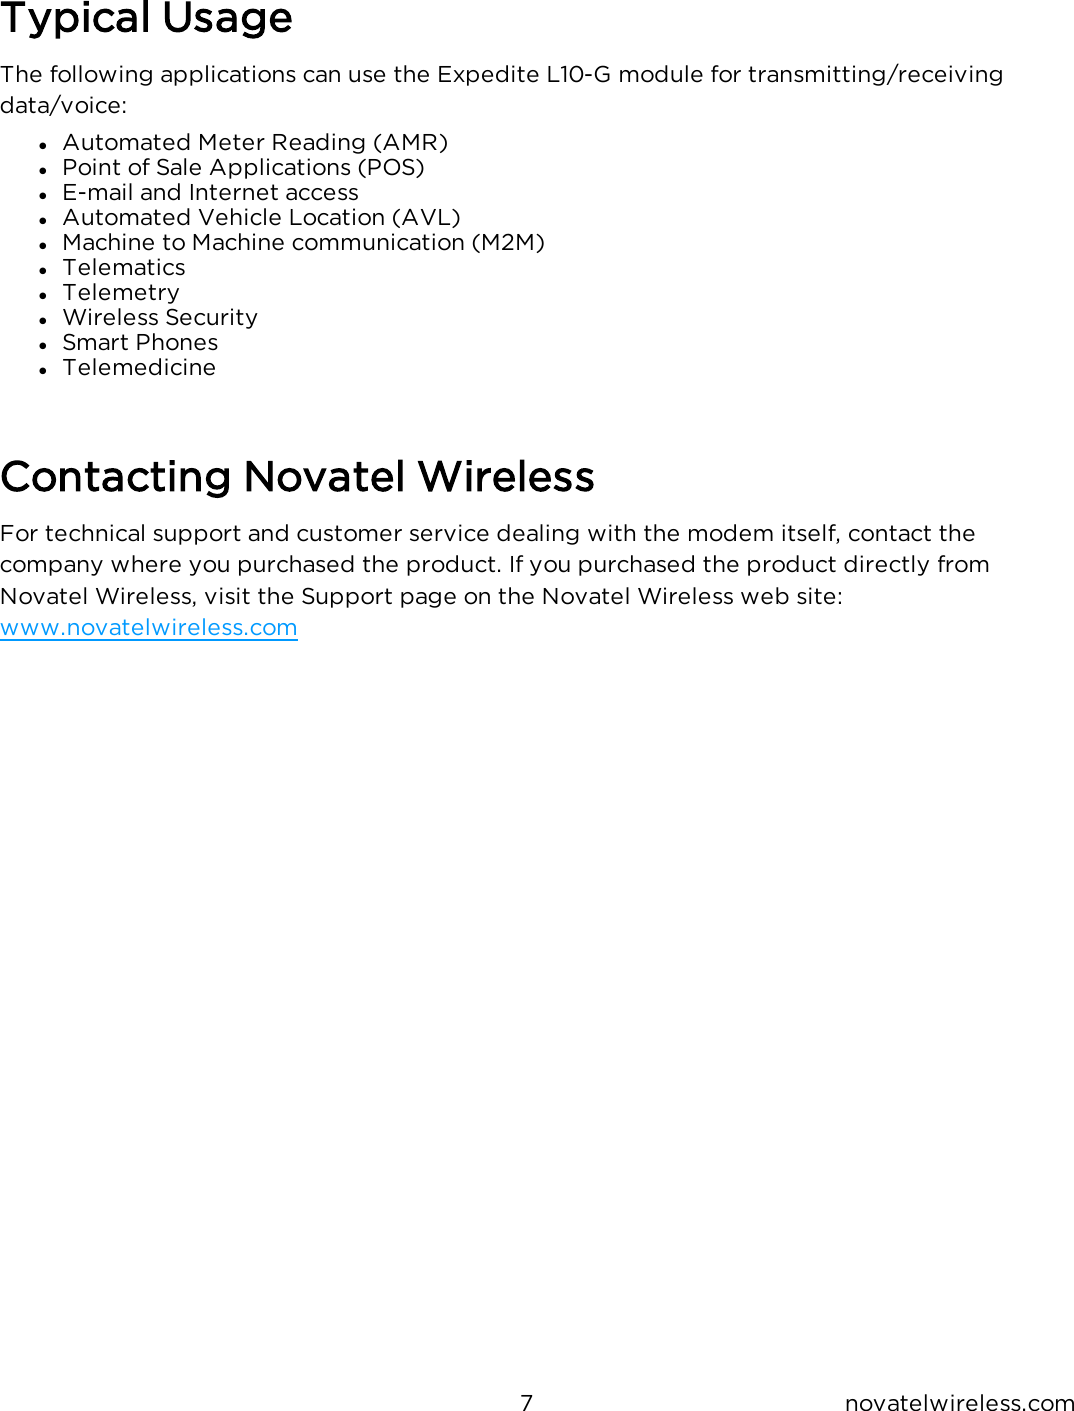 7 novatelwireless.comTypical UsageThe following applications can use the Expedite L10-G module for transmitting/receivingdata/voice:lAutomated Meter Reading (AMR)lPoint of Sale Applications (POS)lE-mail and Internet accesslAutomated Vehicle Location (AVL)lMachine to Machine communication (M2M)lTelematicslTelemetrylWireless SecuritylSmart PhoneslTelemedicineContacting Novatel WirelessFor technical support and customer service dealing with the modem itself, contact thecompany where you purchased the product. If you purchased the product directly fromNovatel Wireless, visit the Support page on the Novatel Wireless web site:www.novatelwireless.com